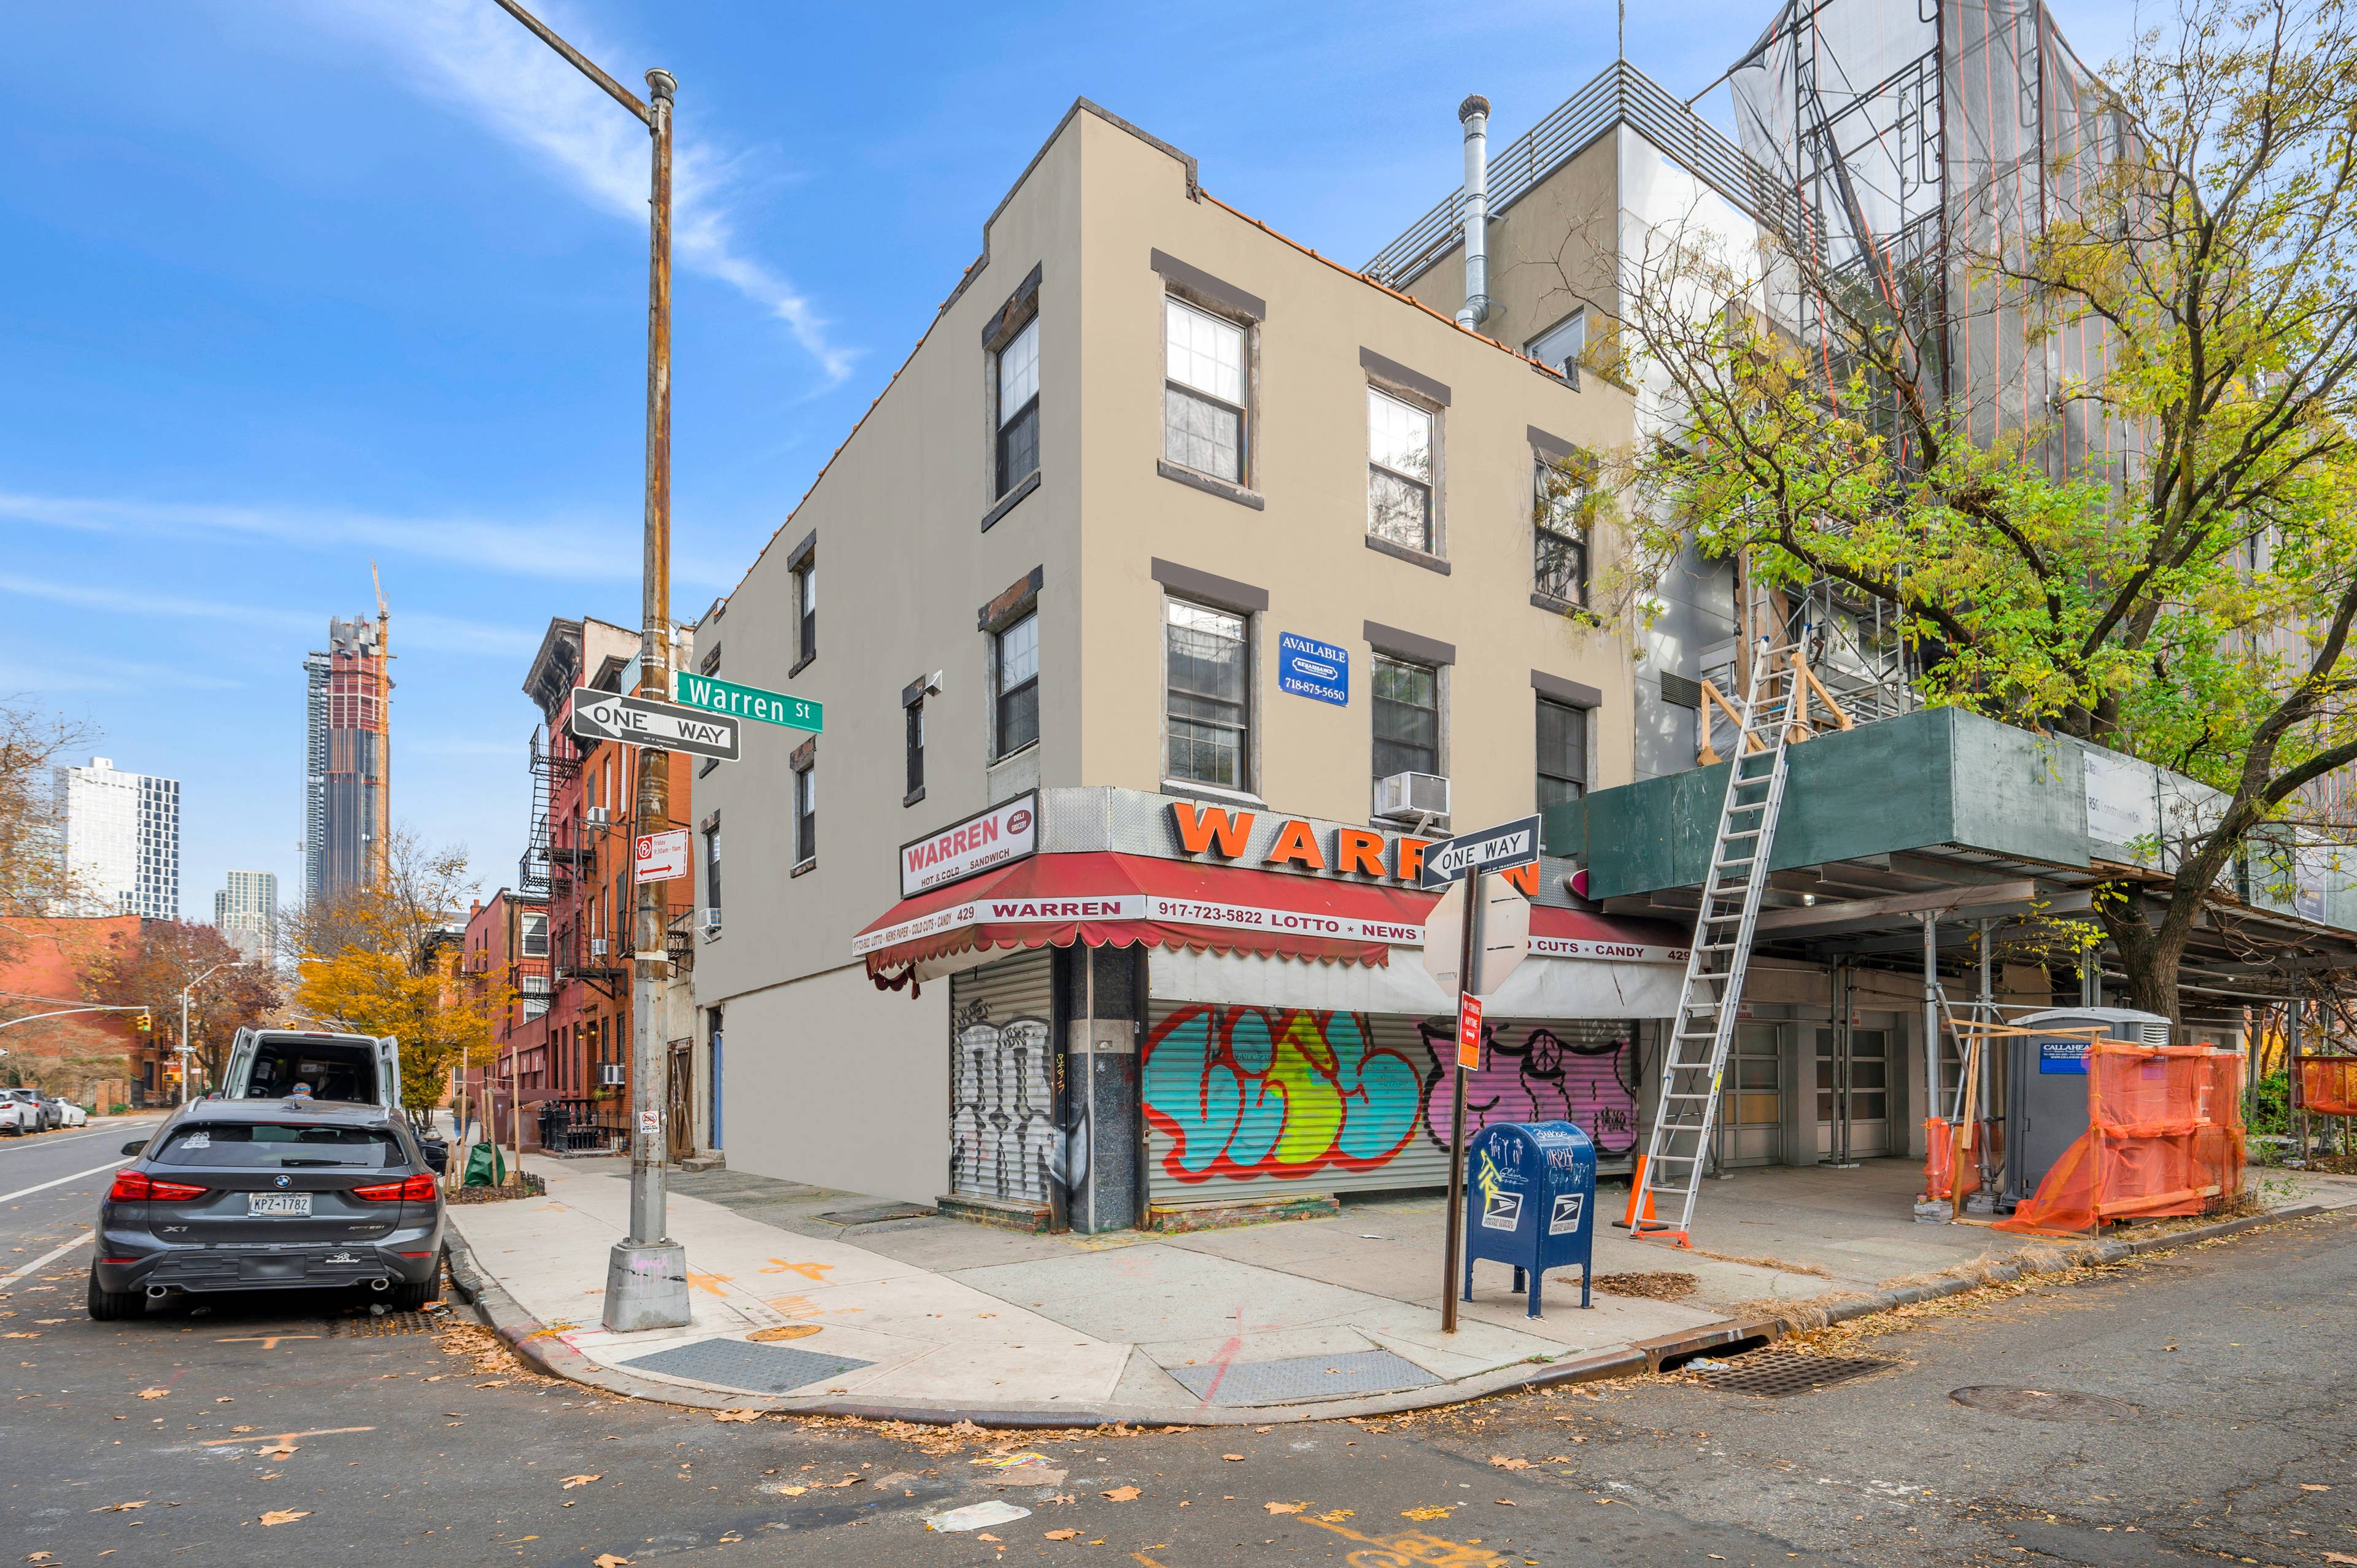 3 story mixed-use building in Boerum Hill